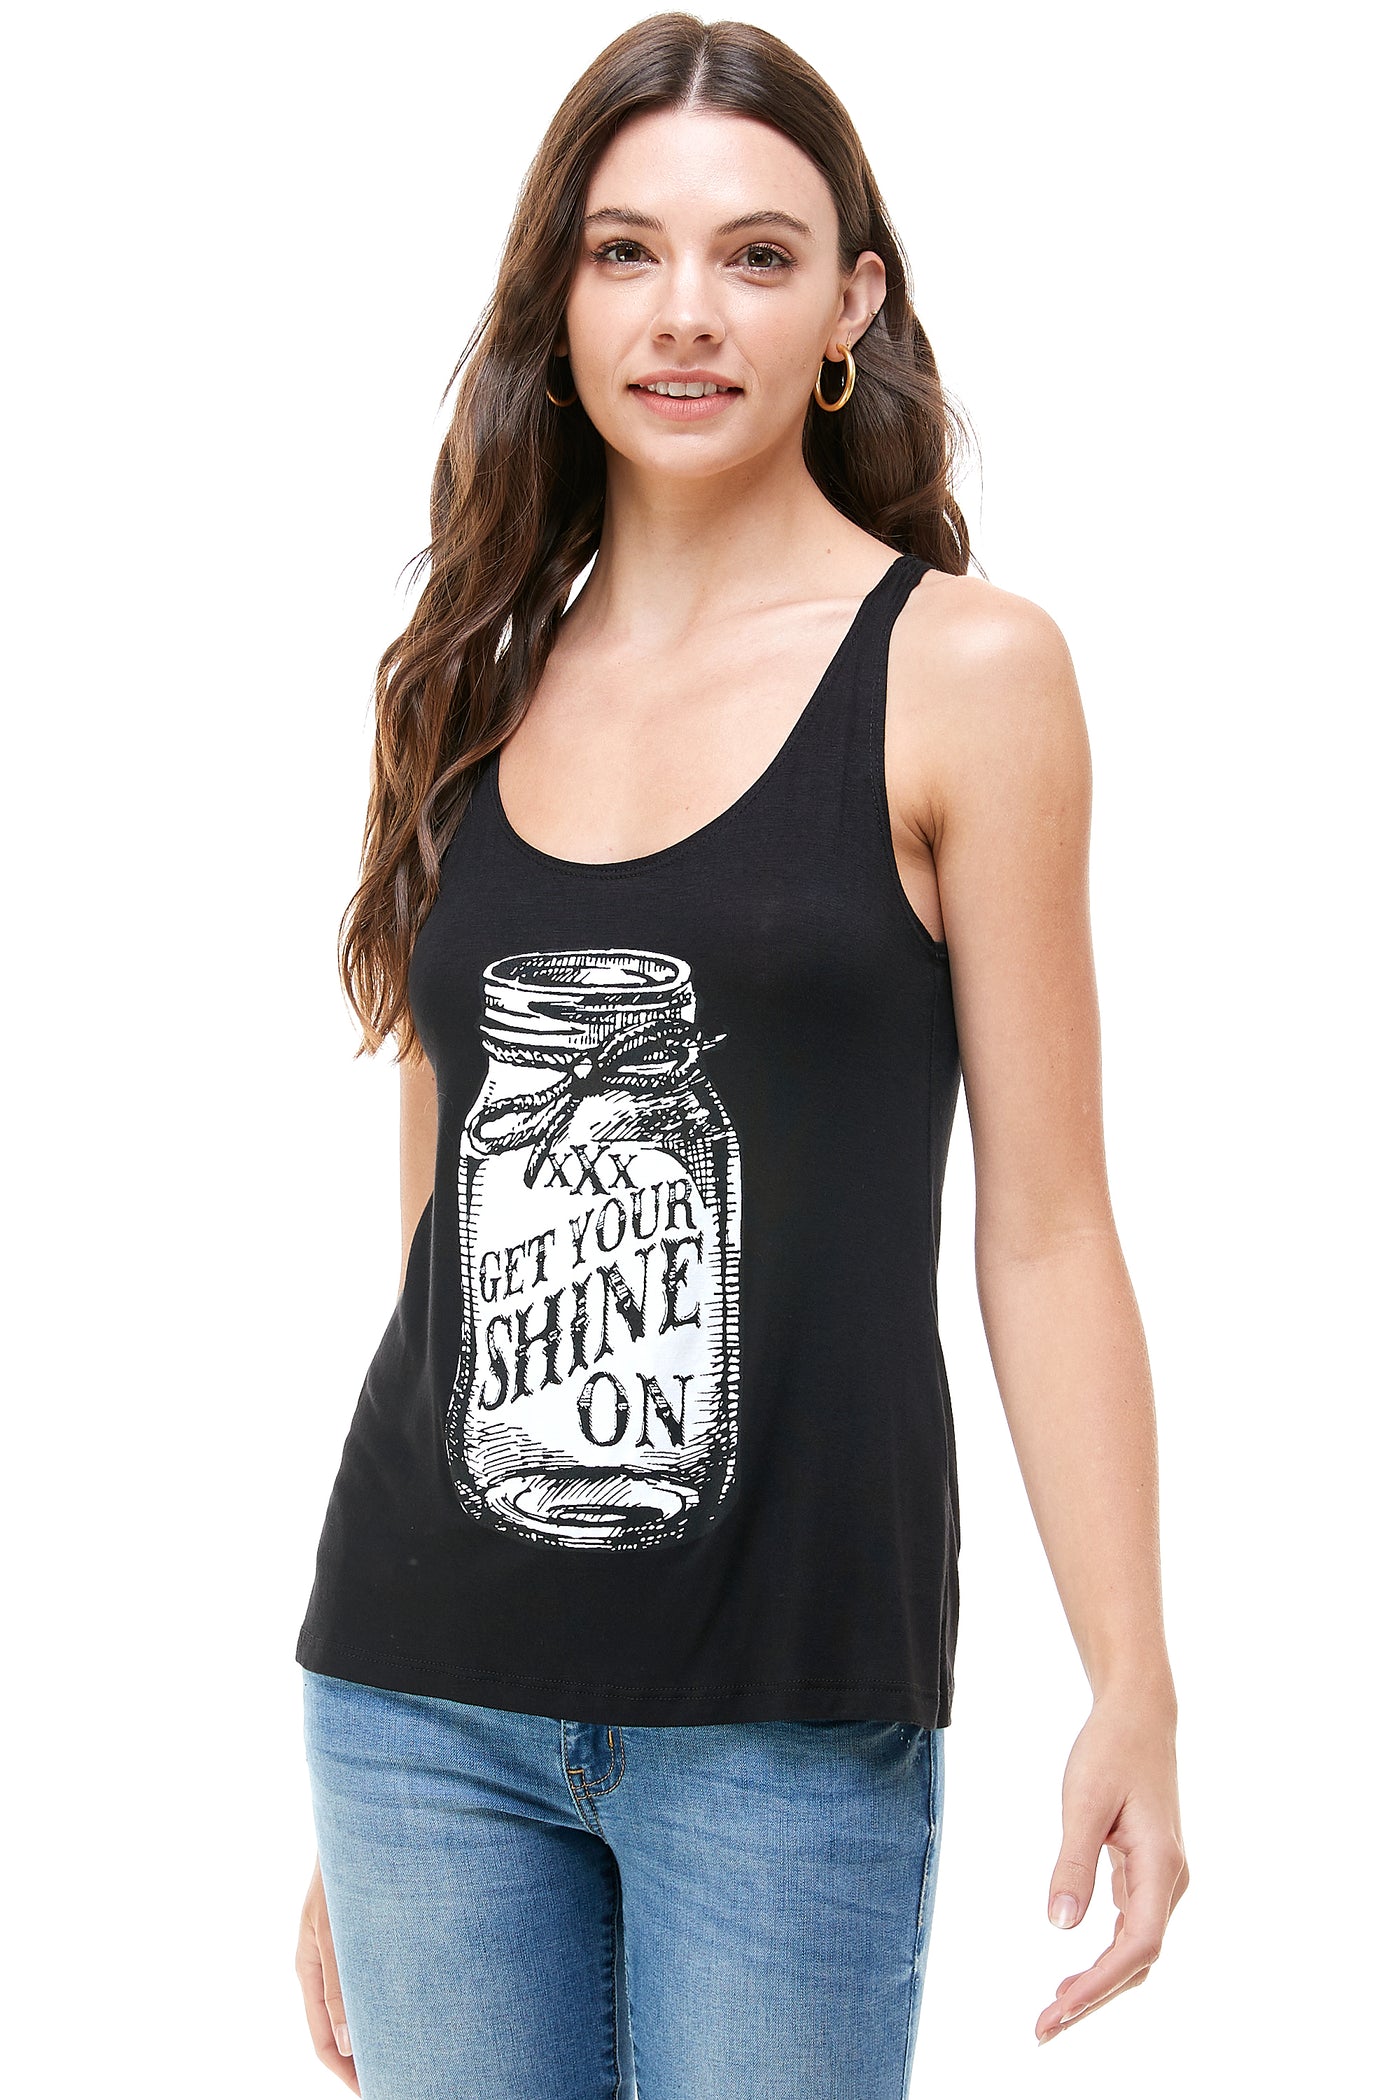 GET YOUR SHINE ON TANK TOP - Trailsclothing.com